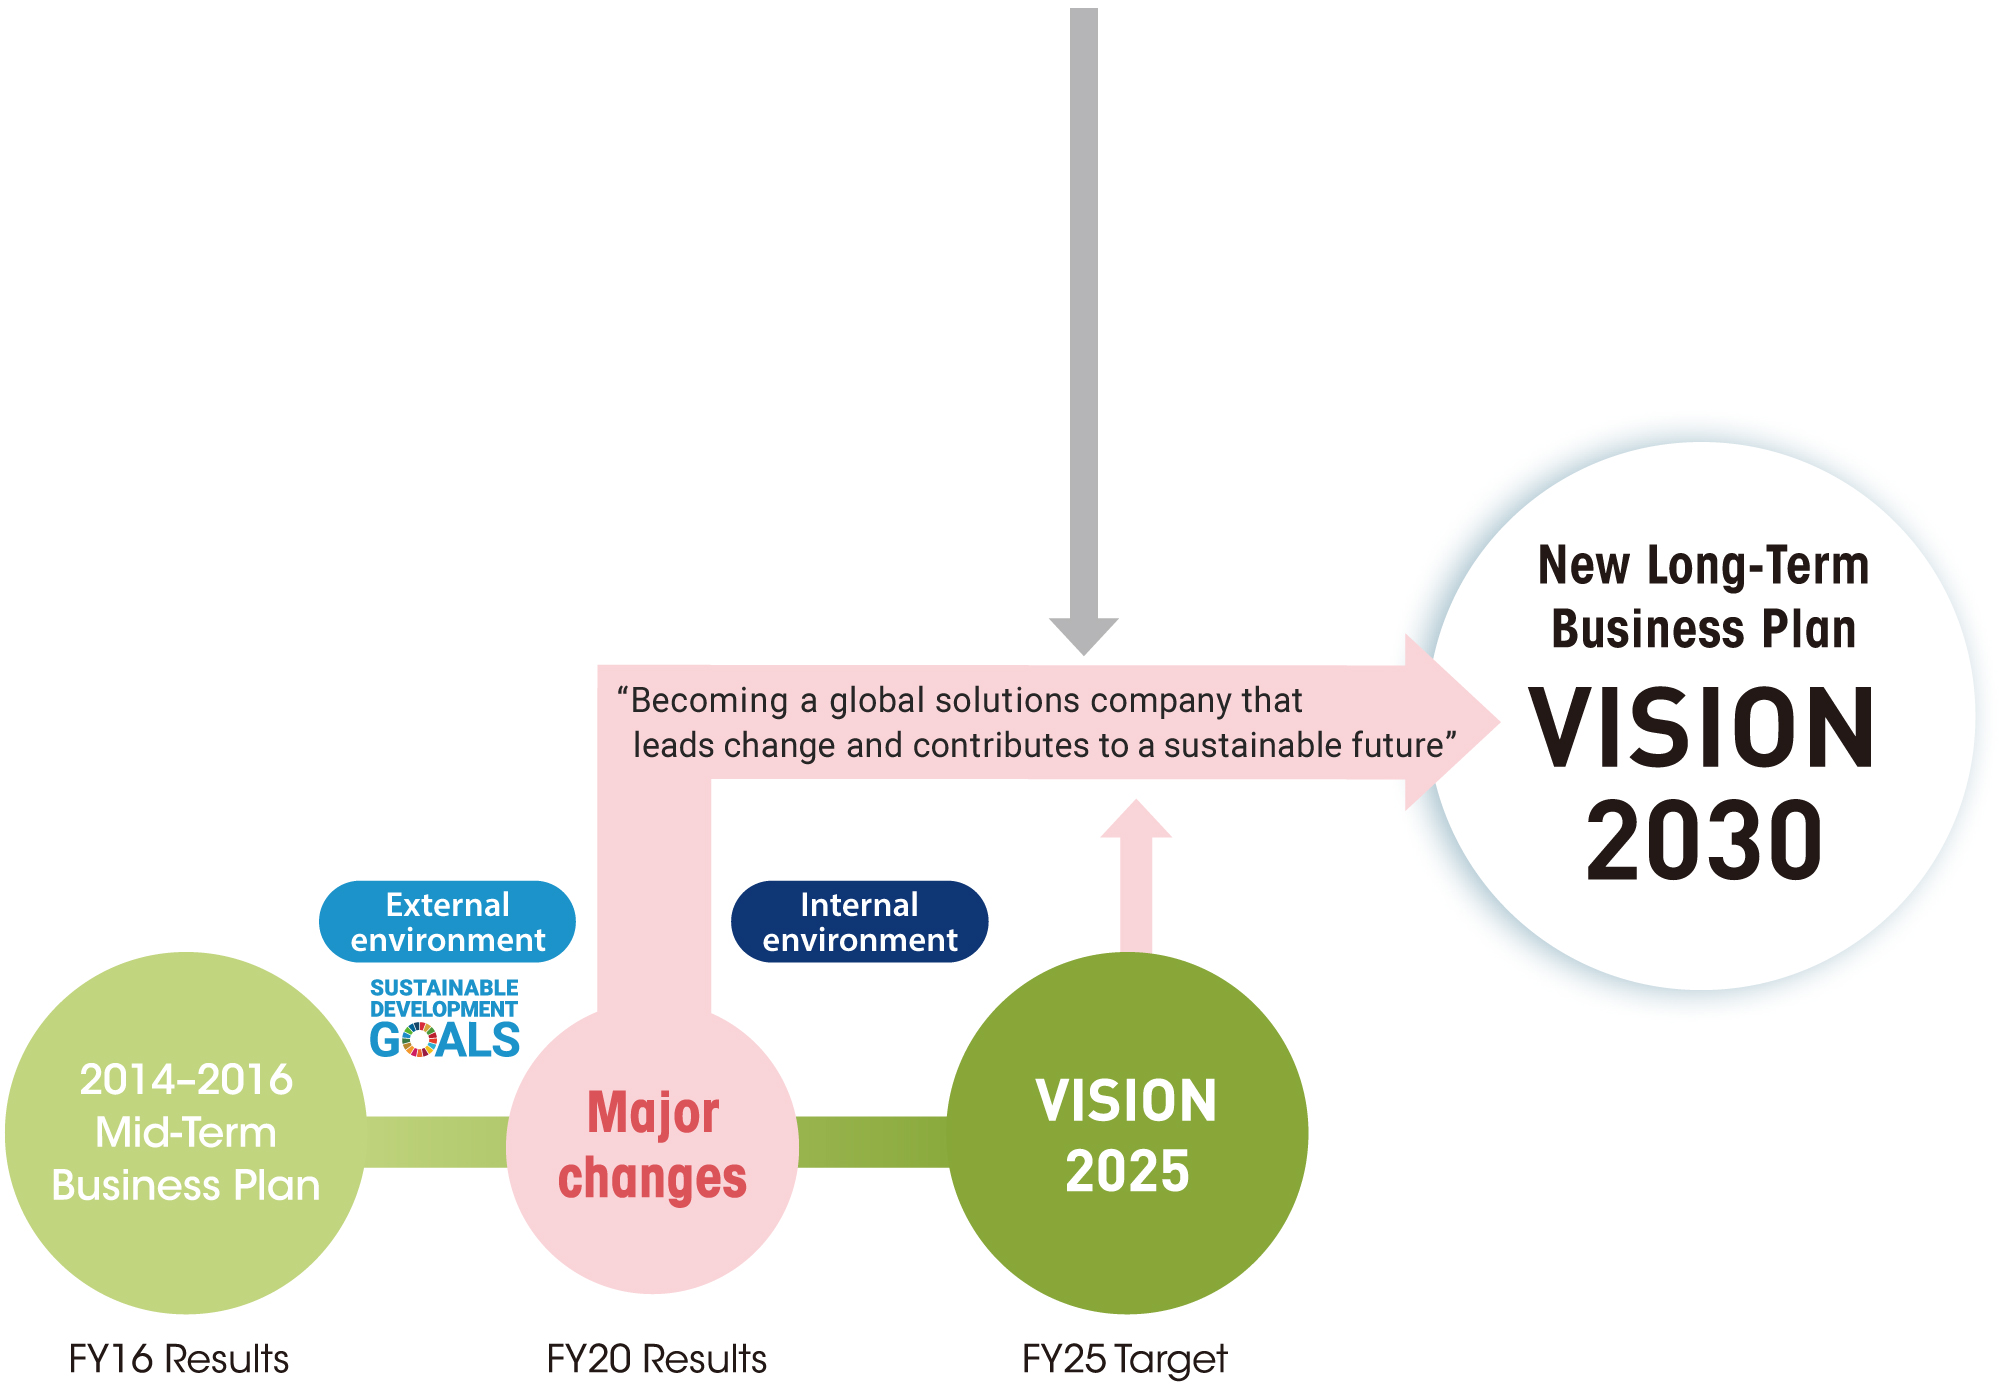 Positioning of VISION 2030